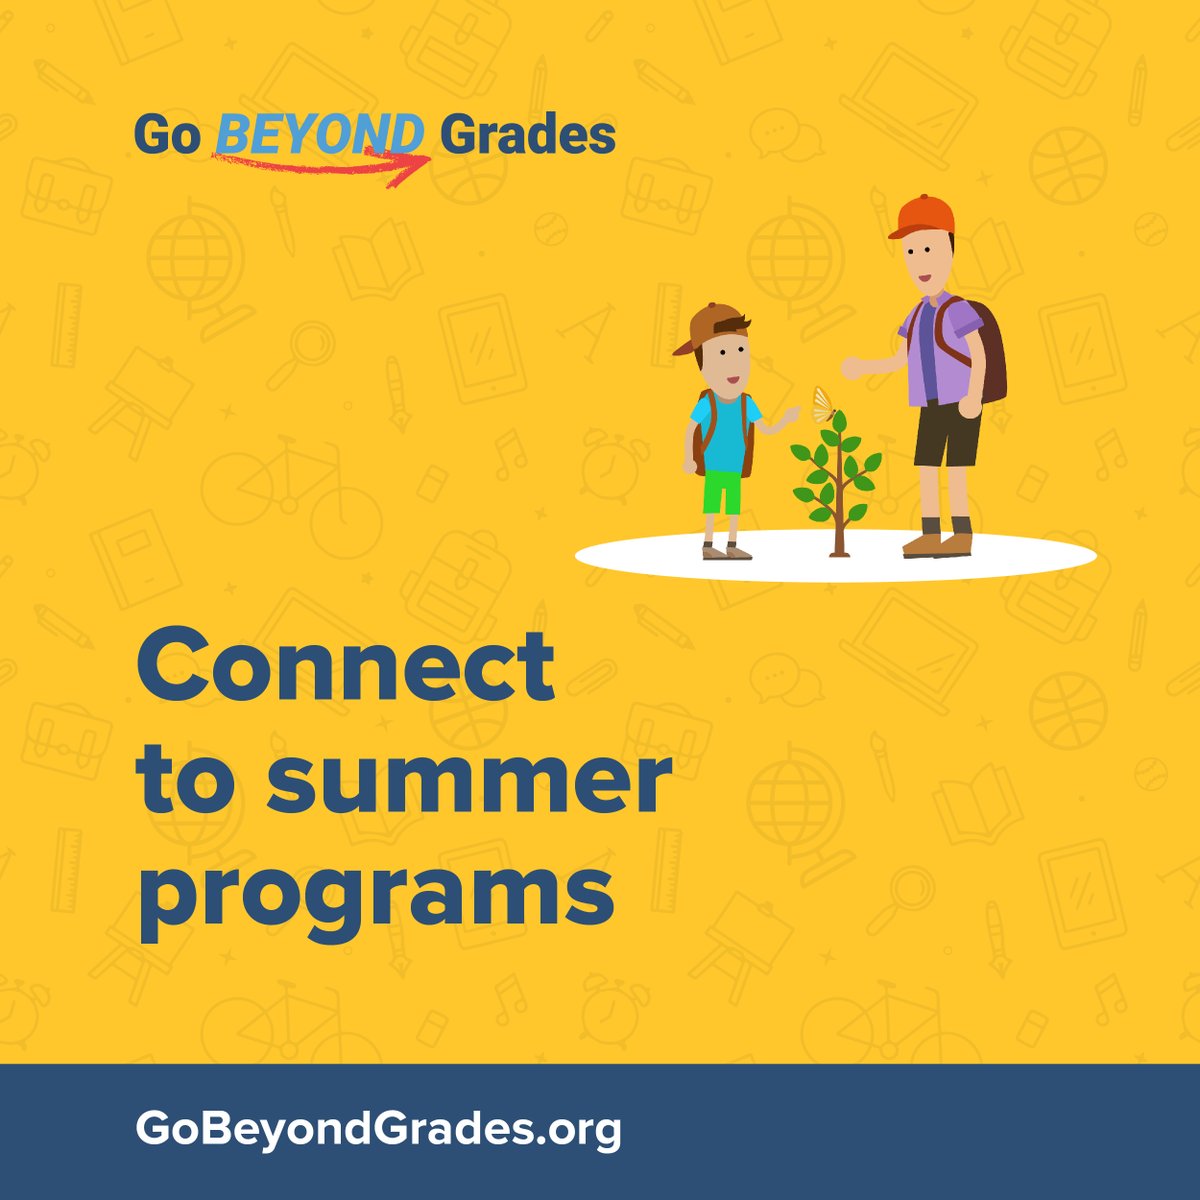 Have fun and support your child’s grade-level progress—you can do both! Find summer learning opportunities like tutoring, camps and more based on your child’s needs and interests. Get started with @BeALearningHero by visiting bit.ly/4dME1qD #GoBeyondGrades